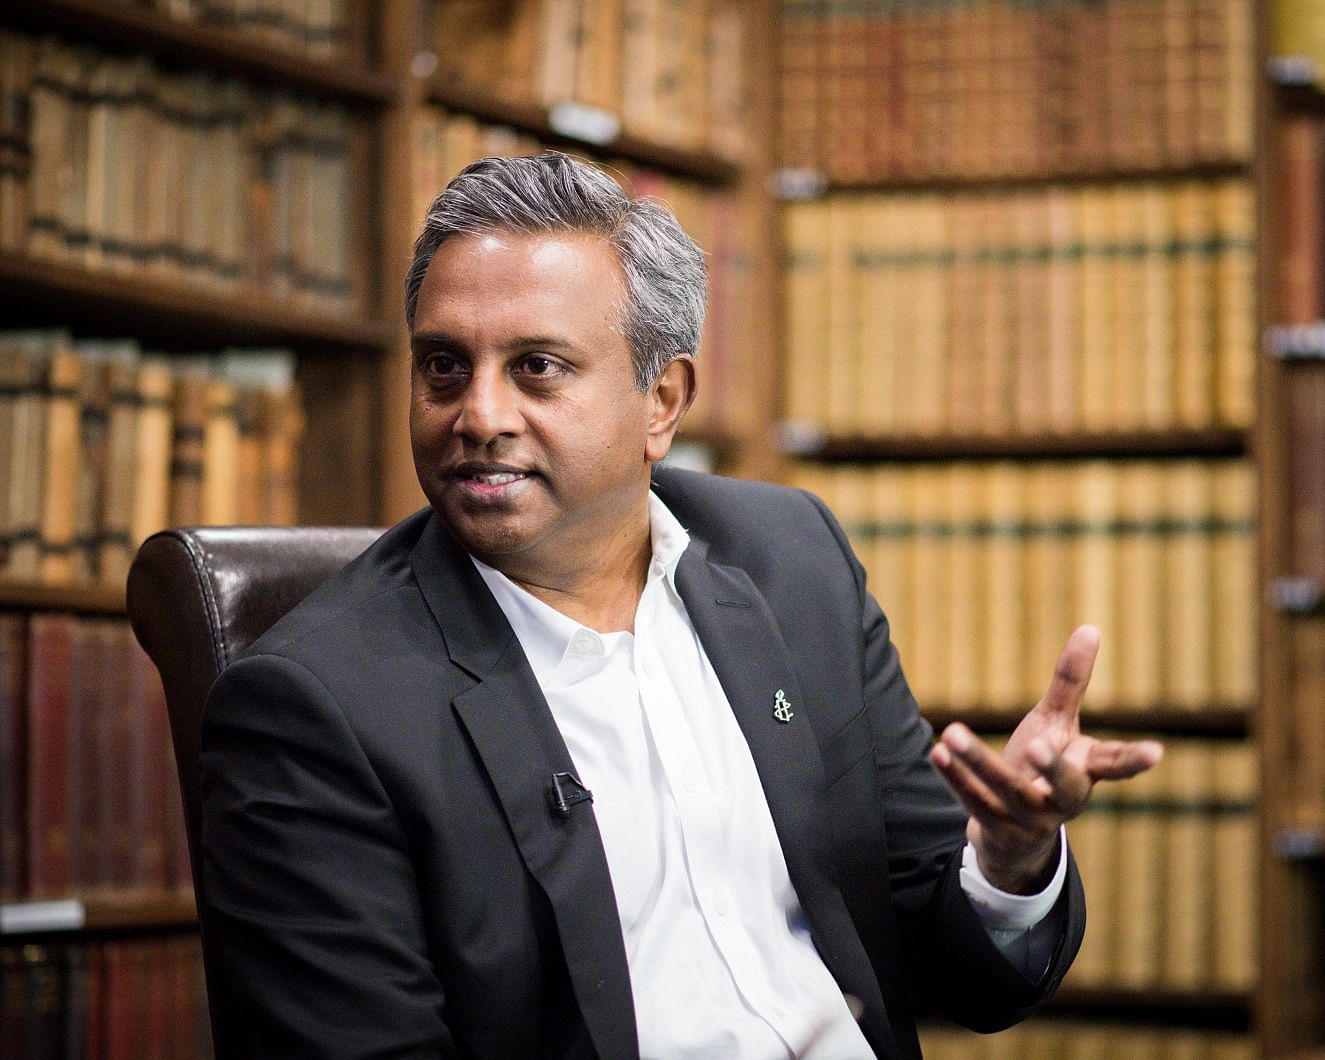 Salil Shetty, just appointed vice president, Global Programs of The Open Society Foundations, hopes to secure justice for the poor caught in the climate crisis.